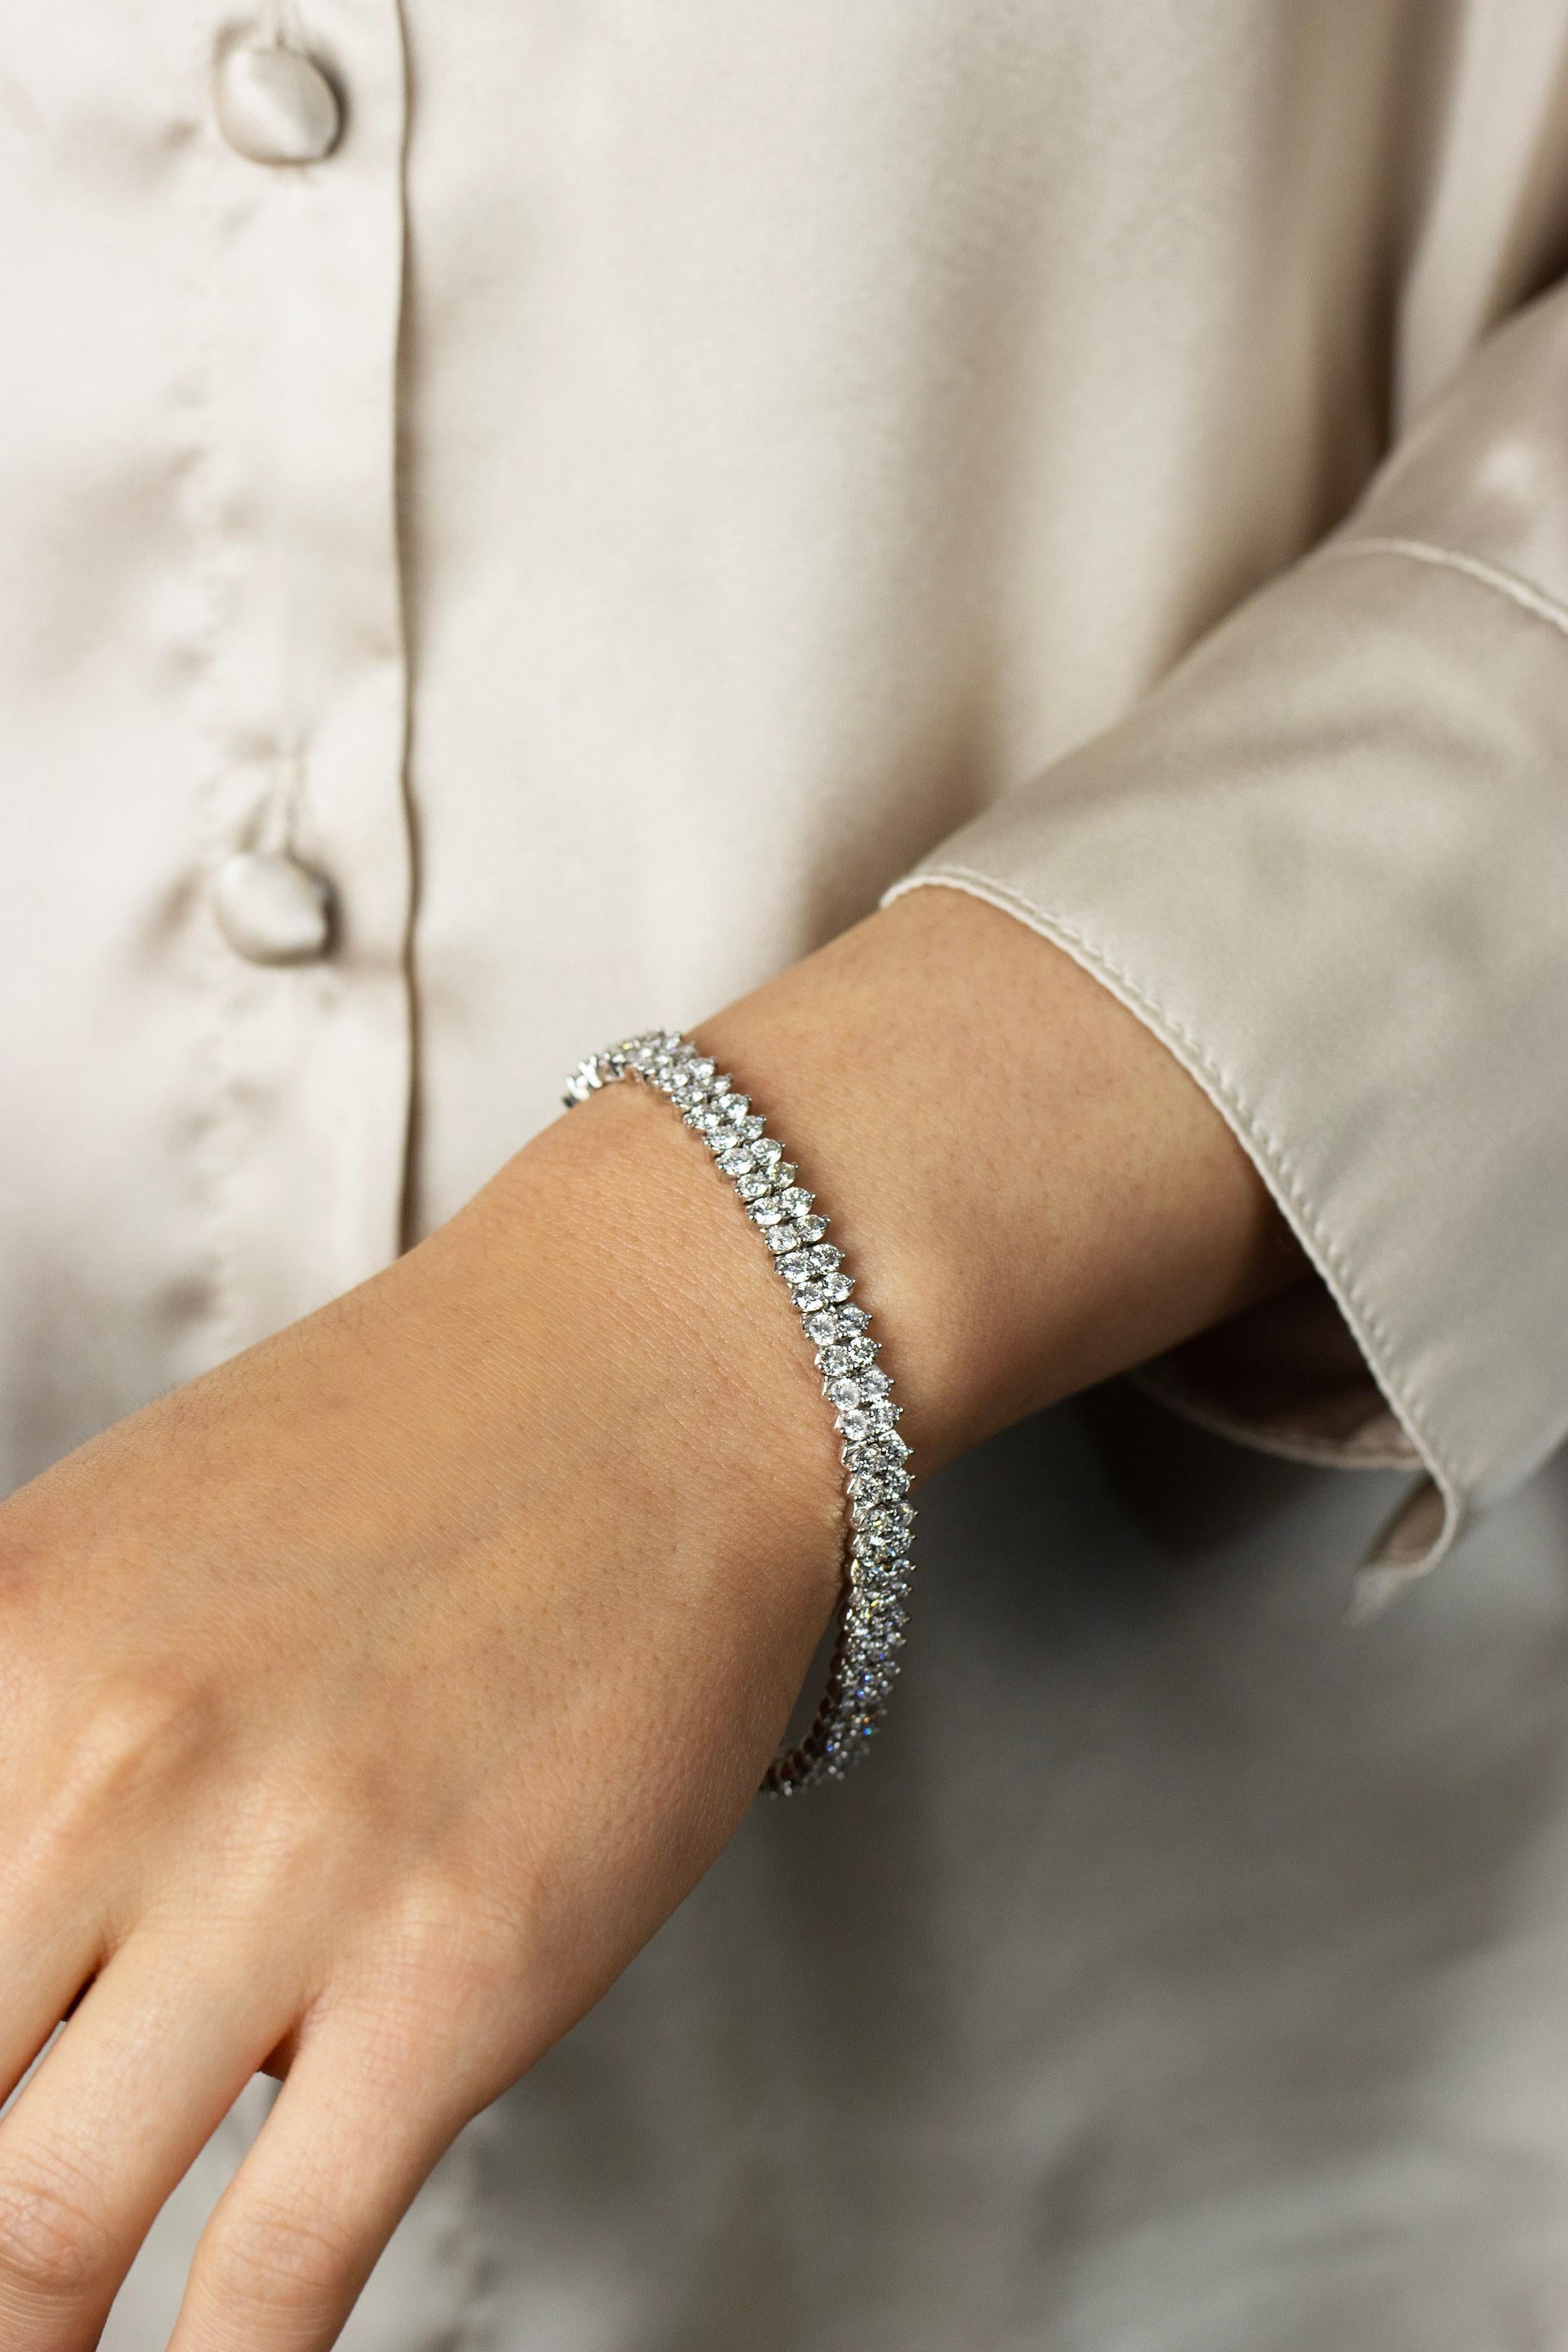 This classic tennis bracelet features a two rows of dazzling round diamonds set in a 18K white gold mounting weighing 9.19 carats total. Each diamond is set in a traditional three prong setting, 7 inches in length and 6.55mm in width.

Roman Malakov